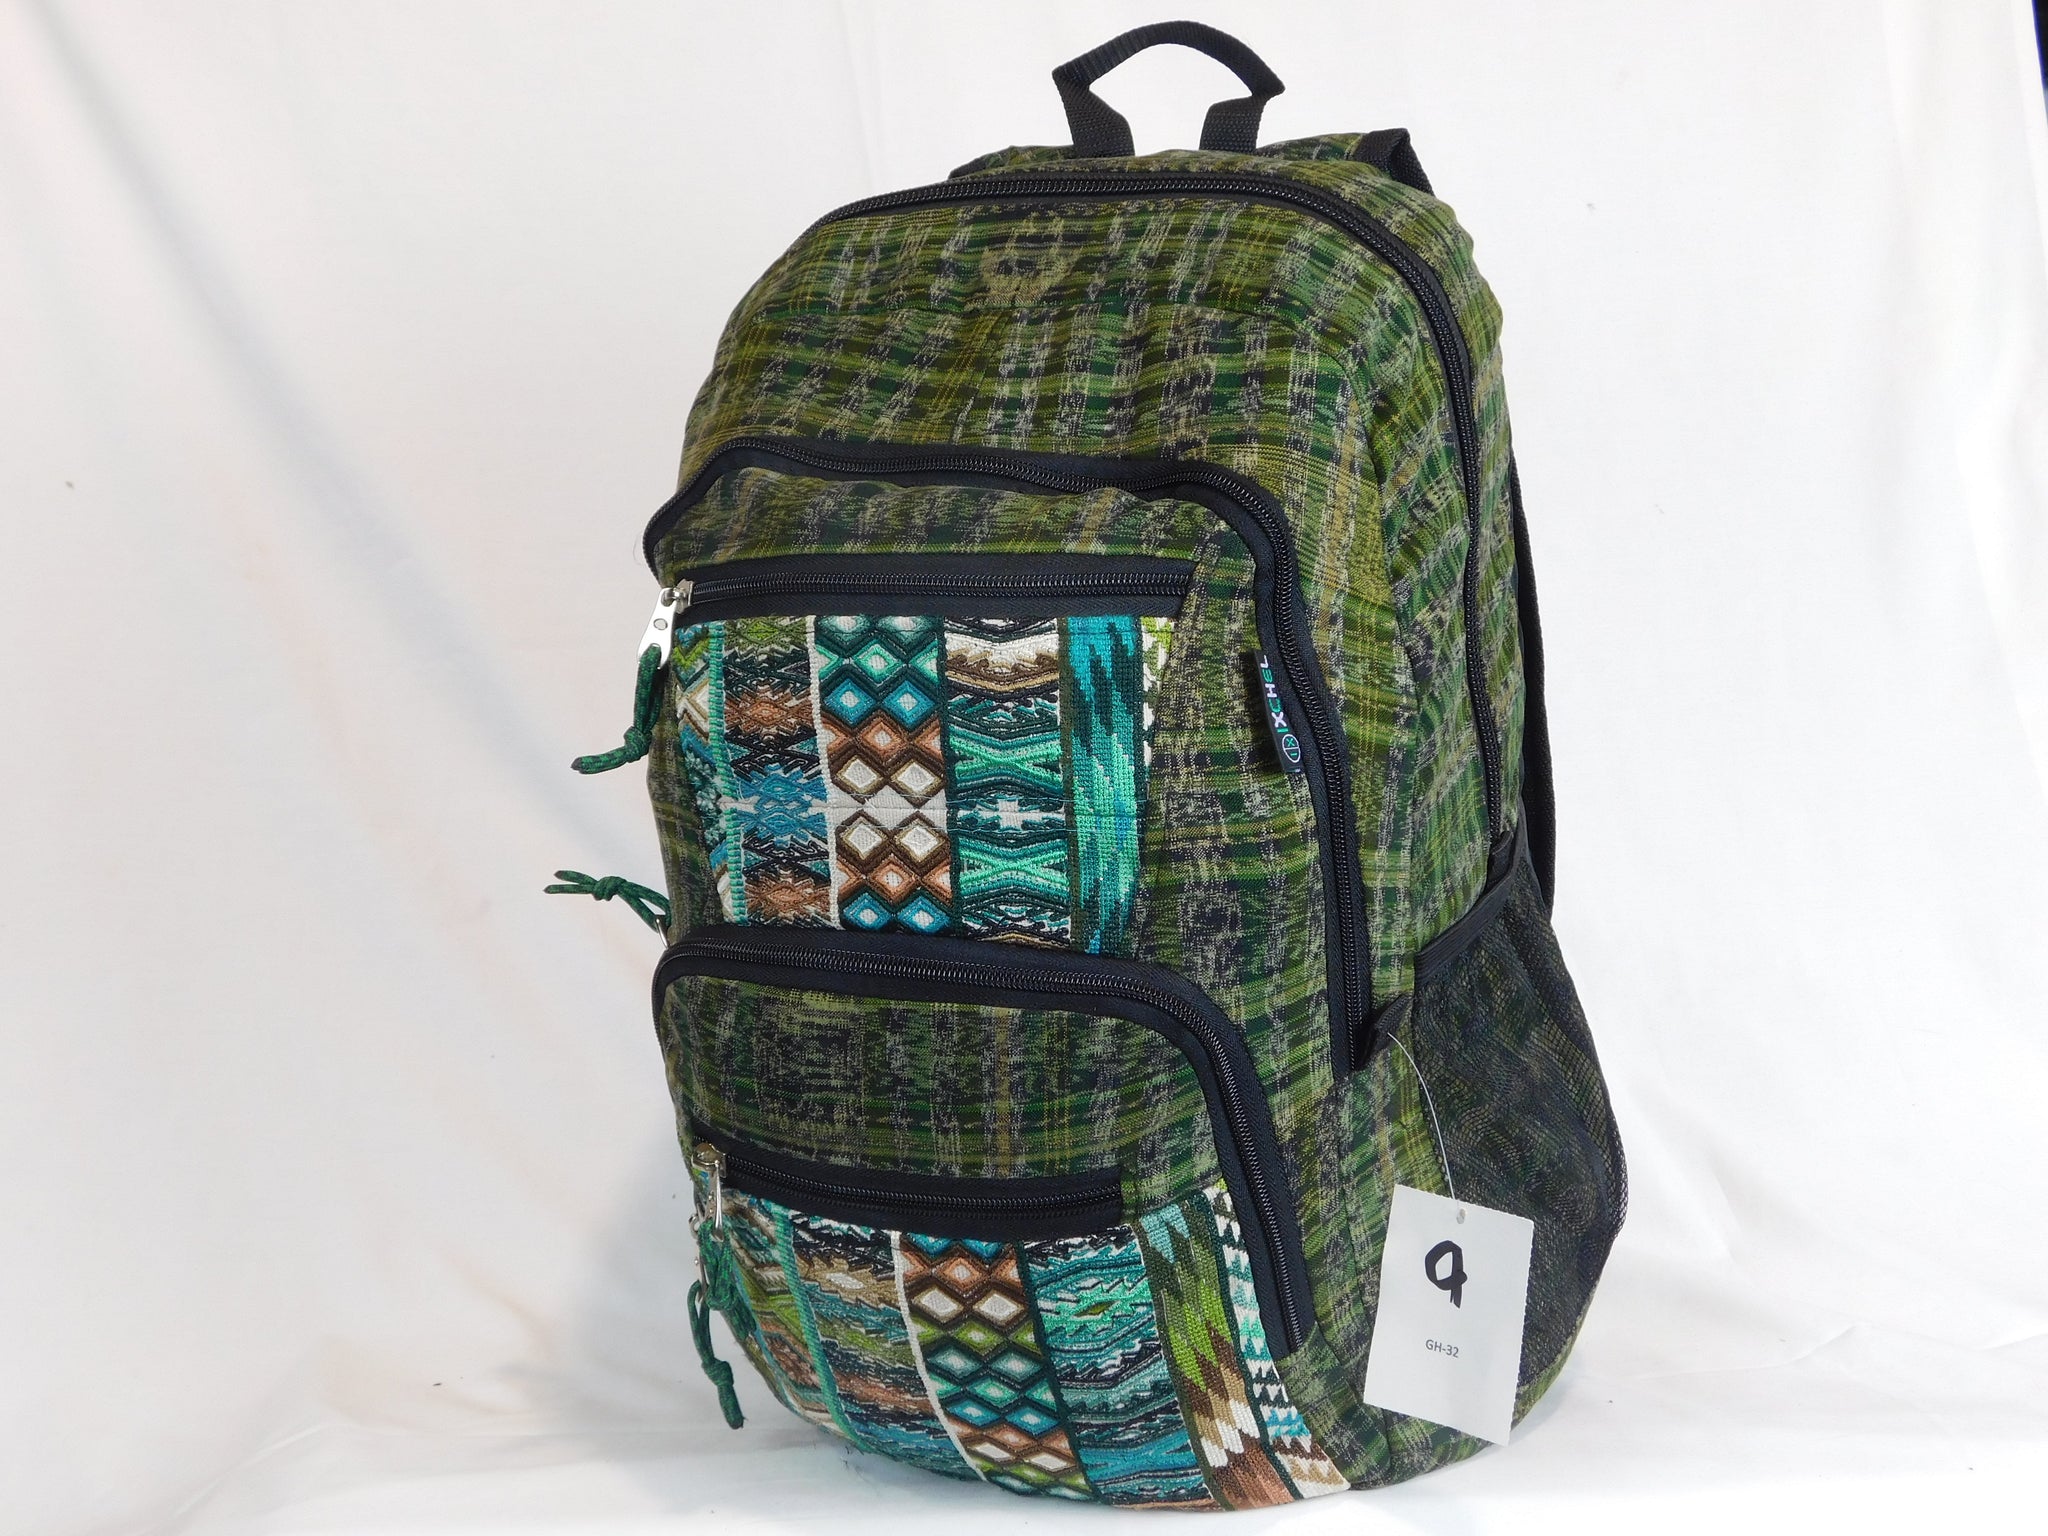 Hand-Woven Backpack with Hand-Brocaded Accents (Large)